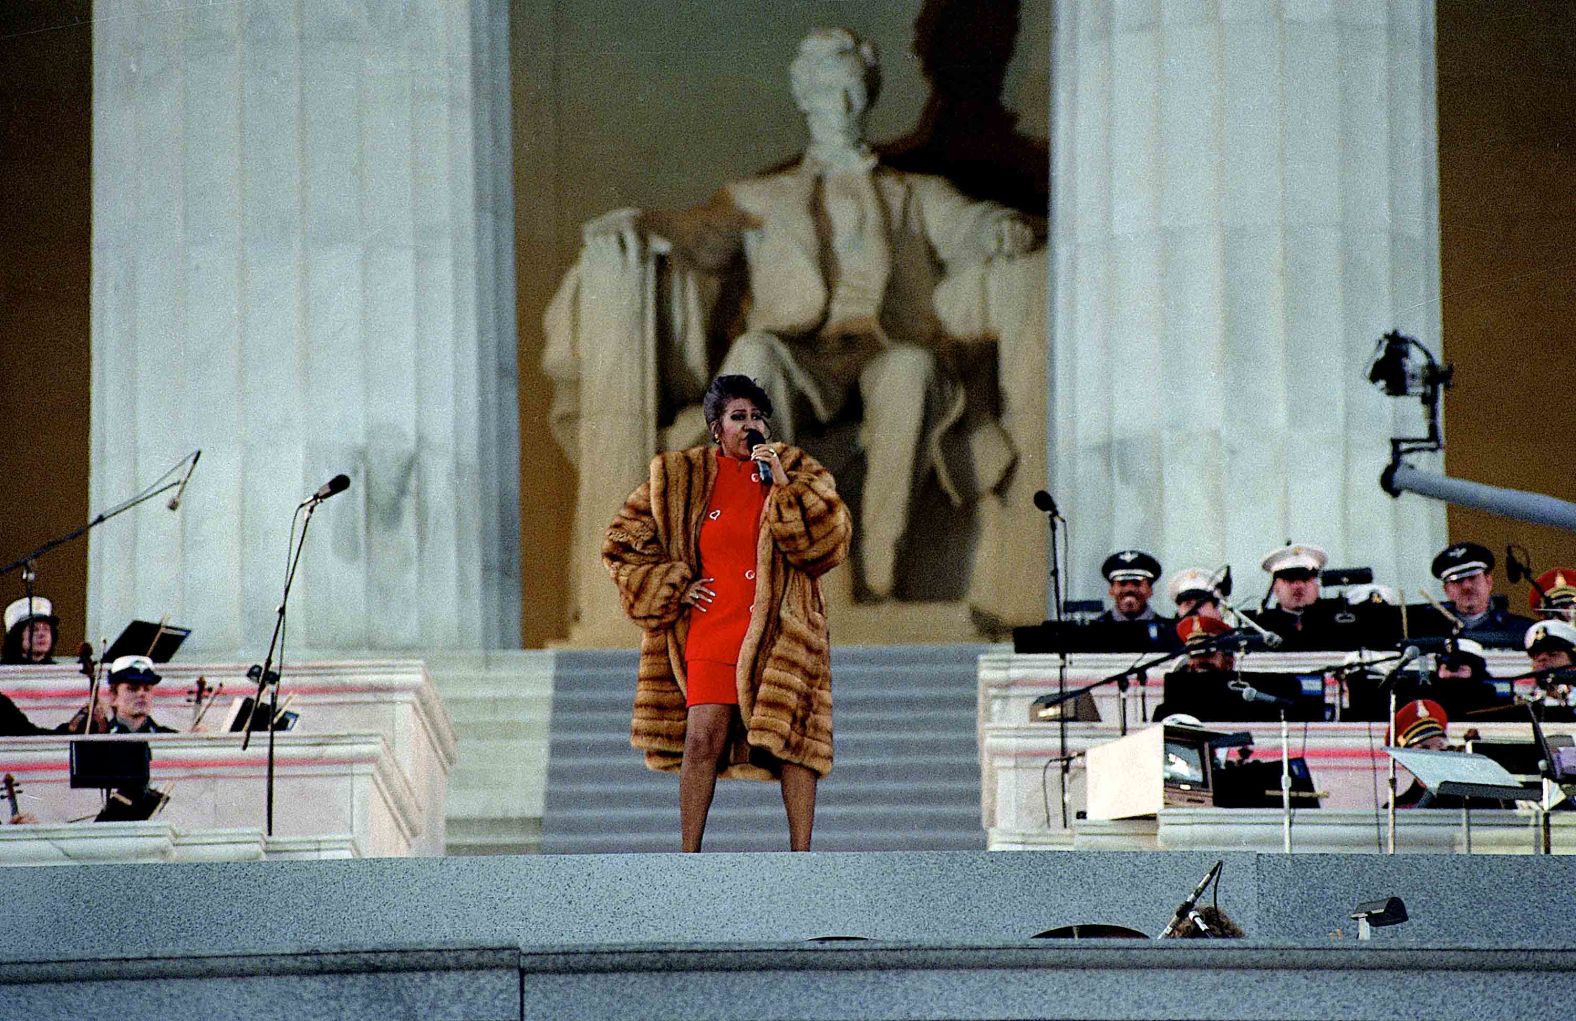 Franklin preforms at the Lincoln Memorial for President Clinton's inaugural gala in 1992.